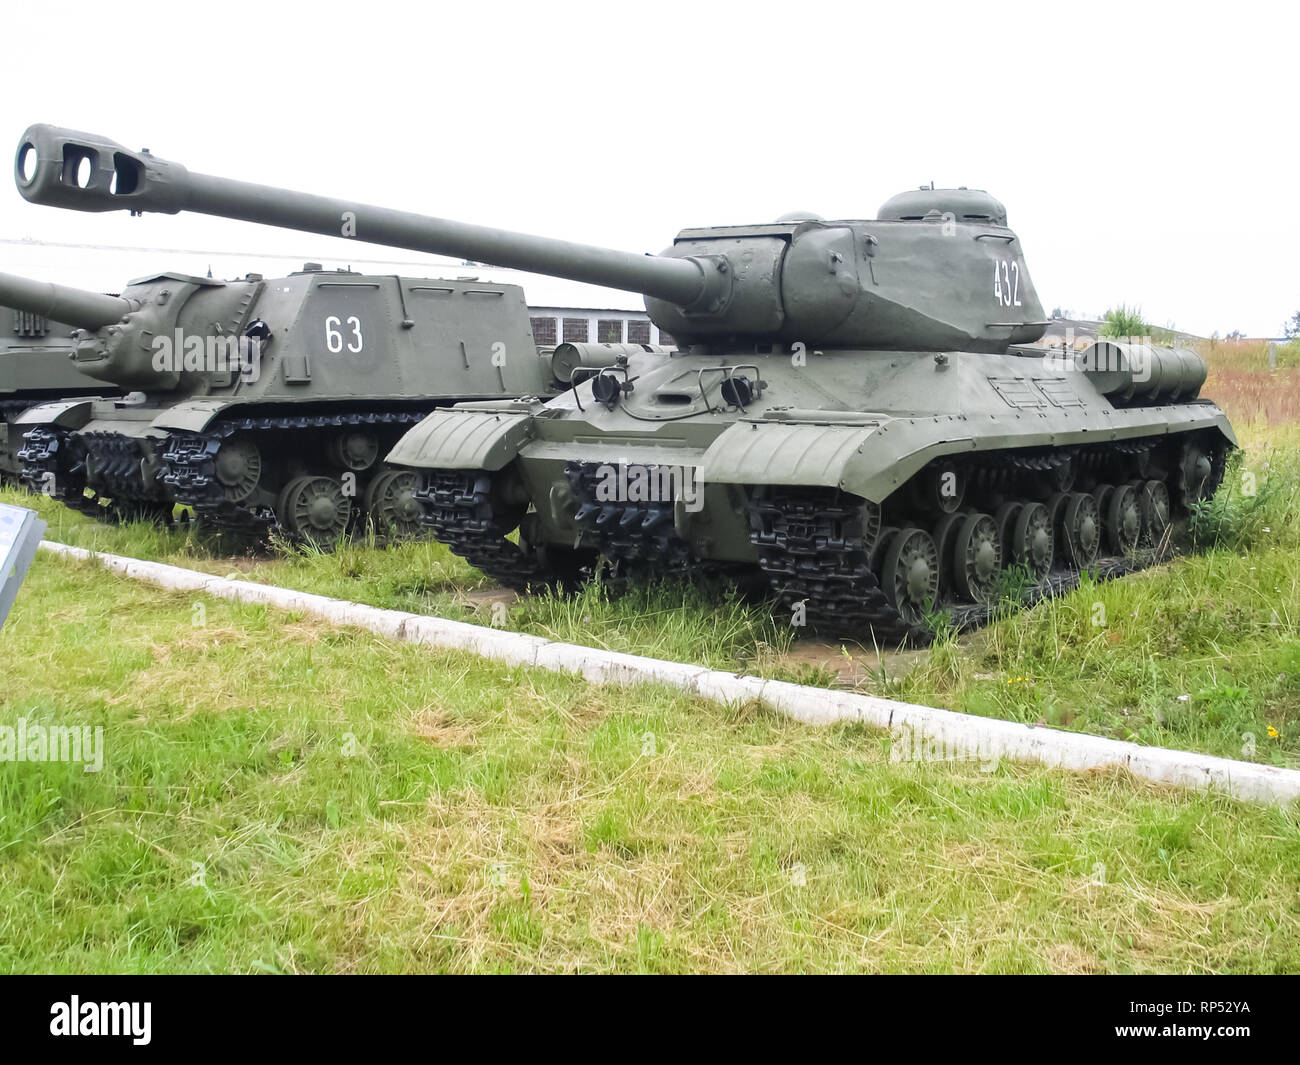 Kubinka, Russia - June 12, 2011: Museum of armored vehicles under the open sky and under sheds in Kubinka near Moscow. Stock Photo